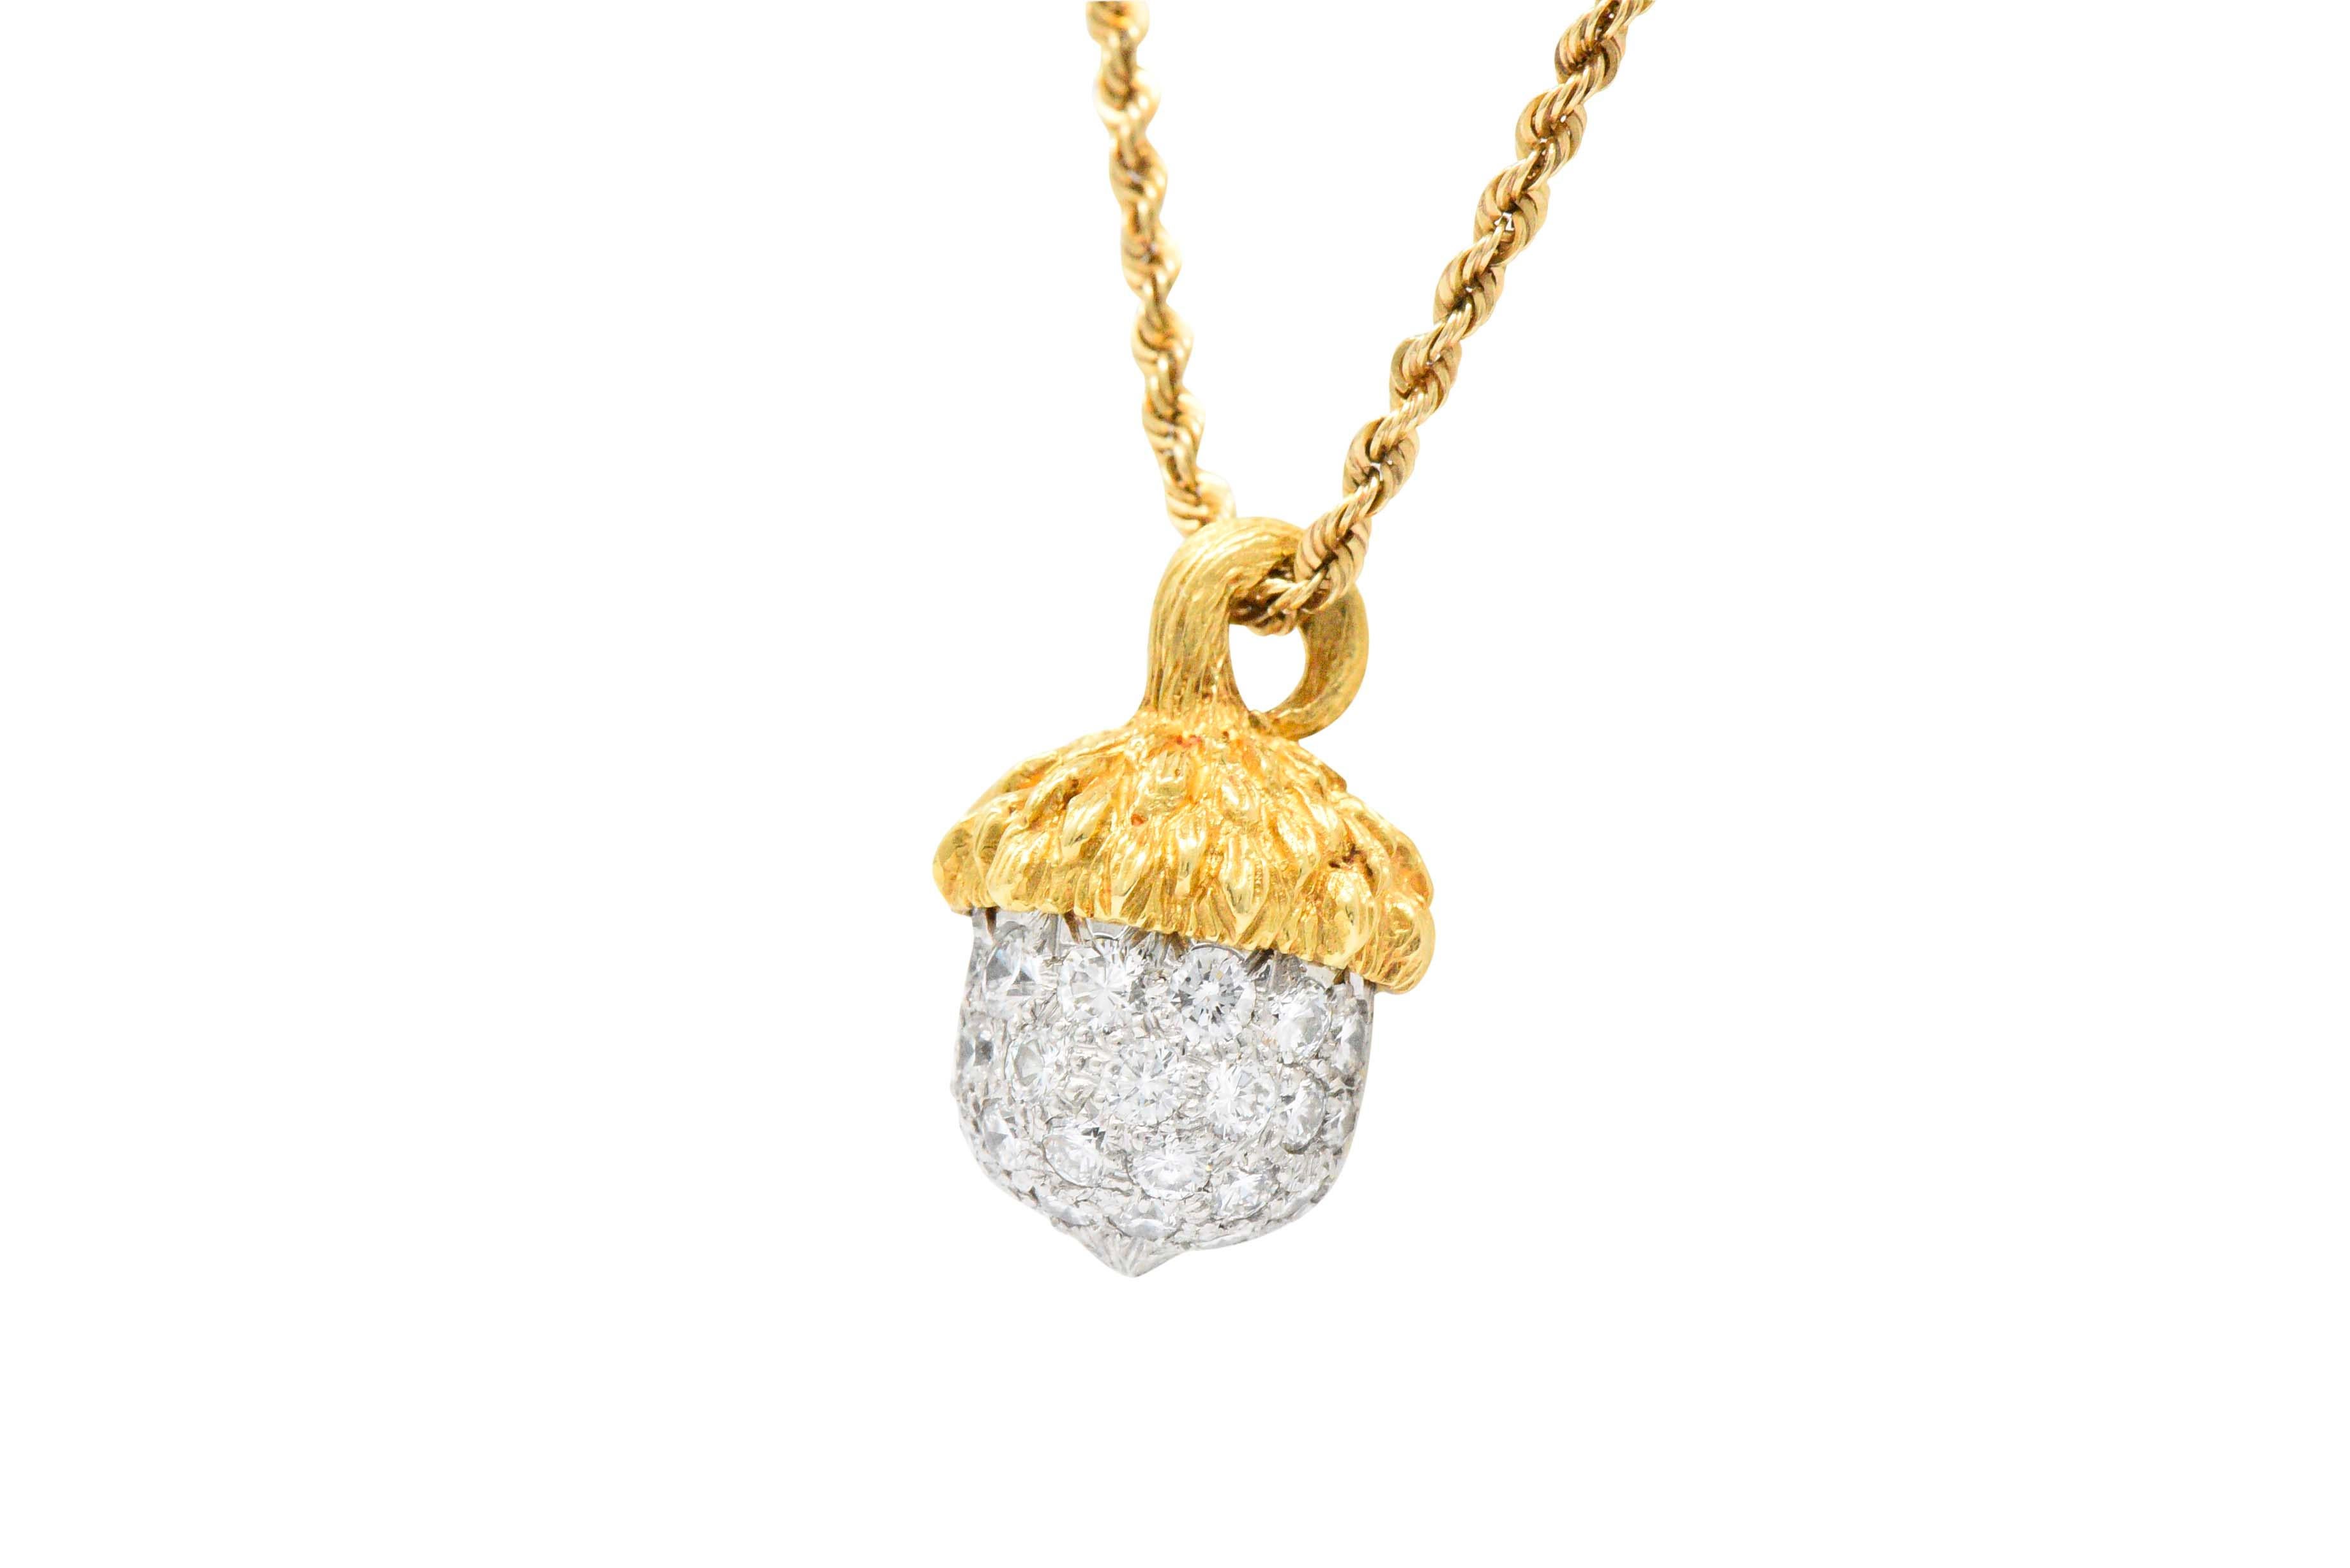 Designed as an acorn with pavé set with round brilliant cut diamonds, weighing approximately 1.20 carats total, G/H color and VS to SI clarity
With a textured gold cap
On a 14 karat twisted rope chain with barrel clasp
The acorn stamped with